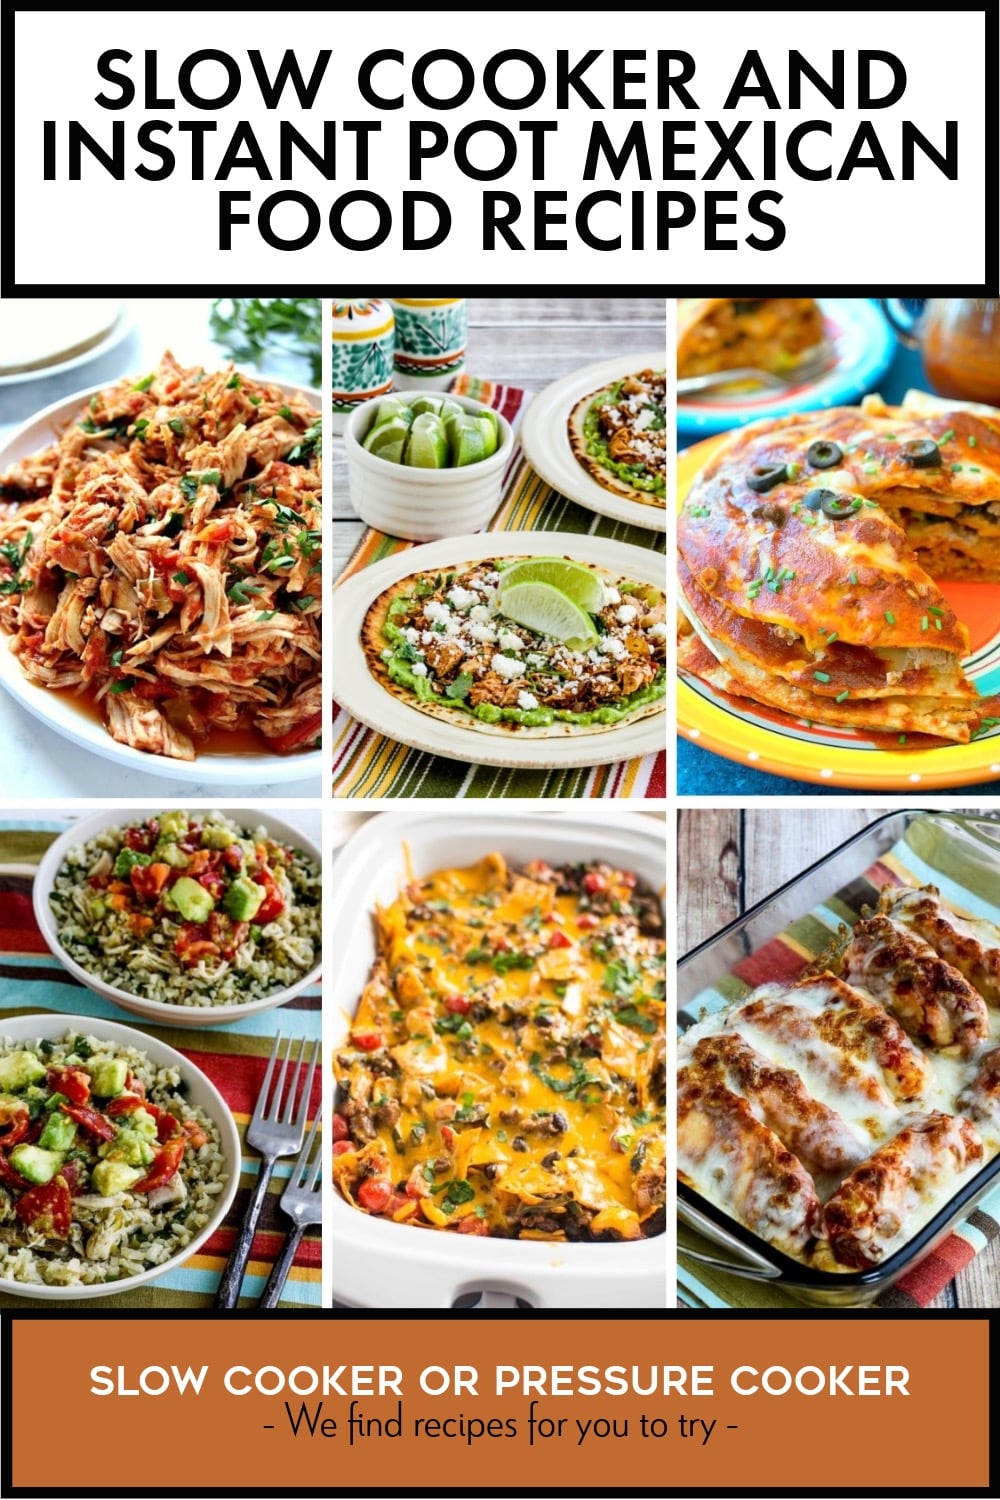 Pinterest image of Slow Cooker and Instant Pot Mexican Food Recipes